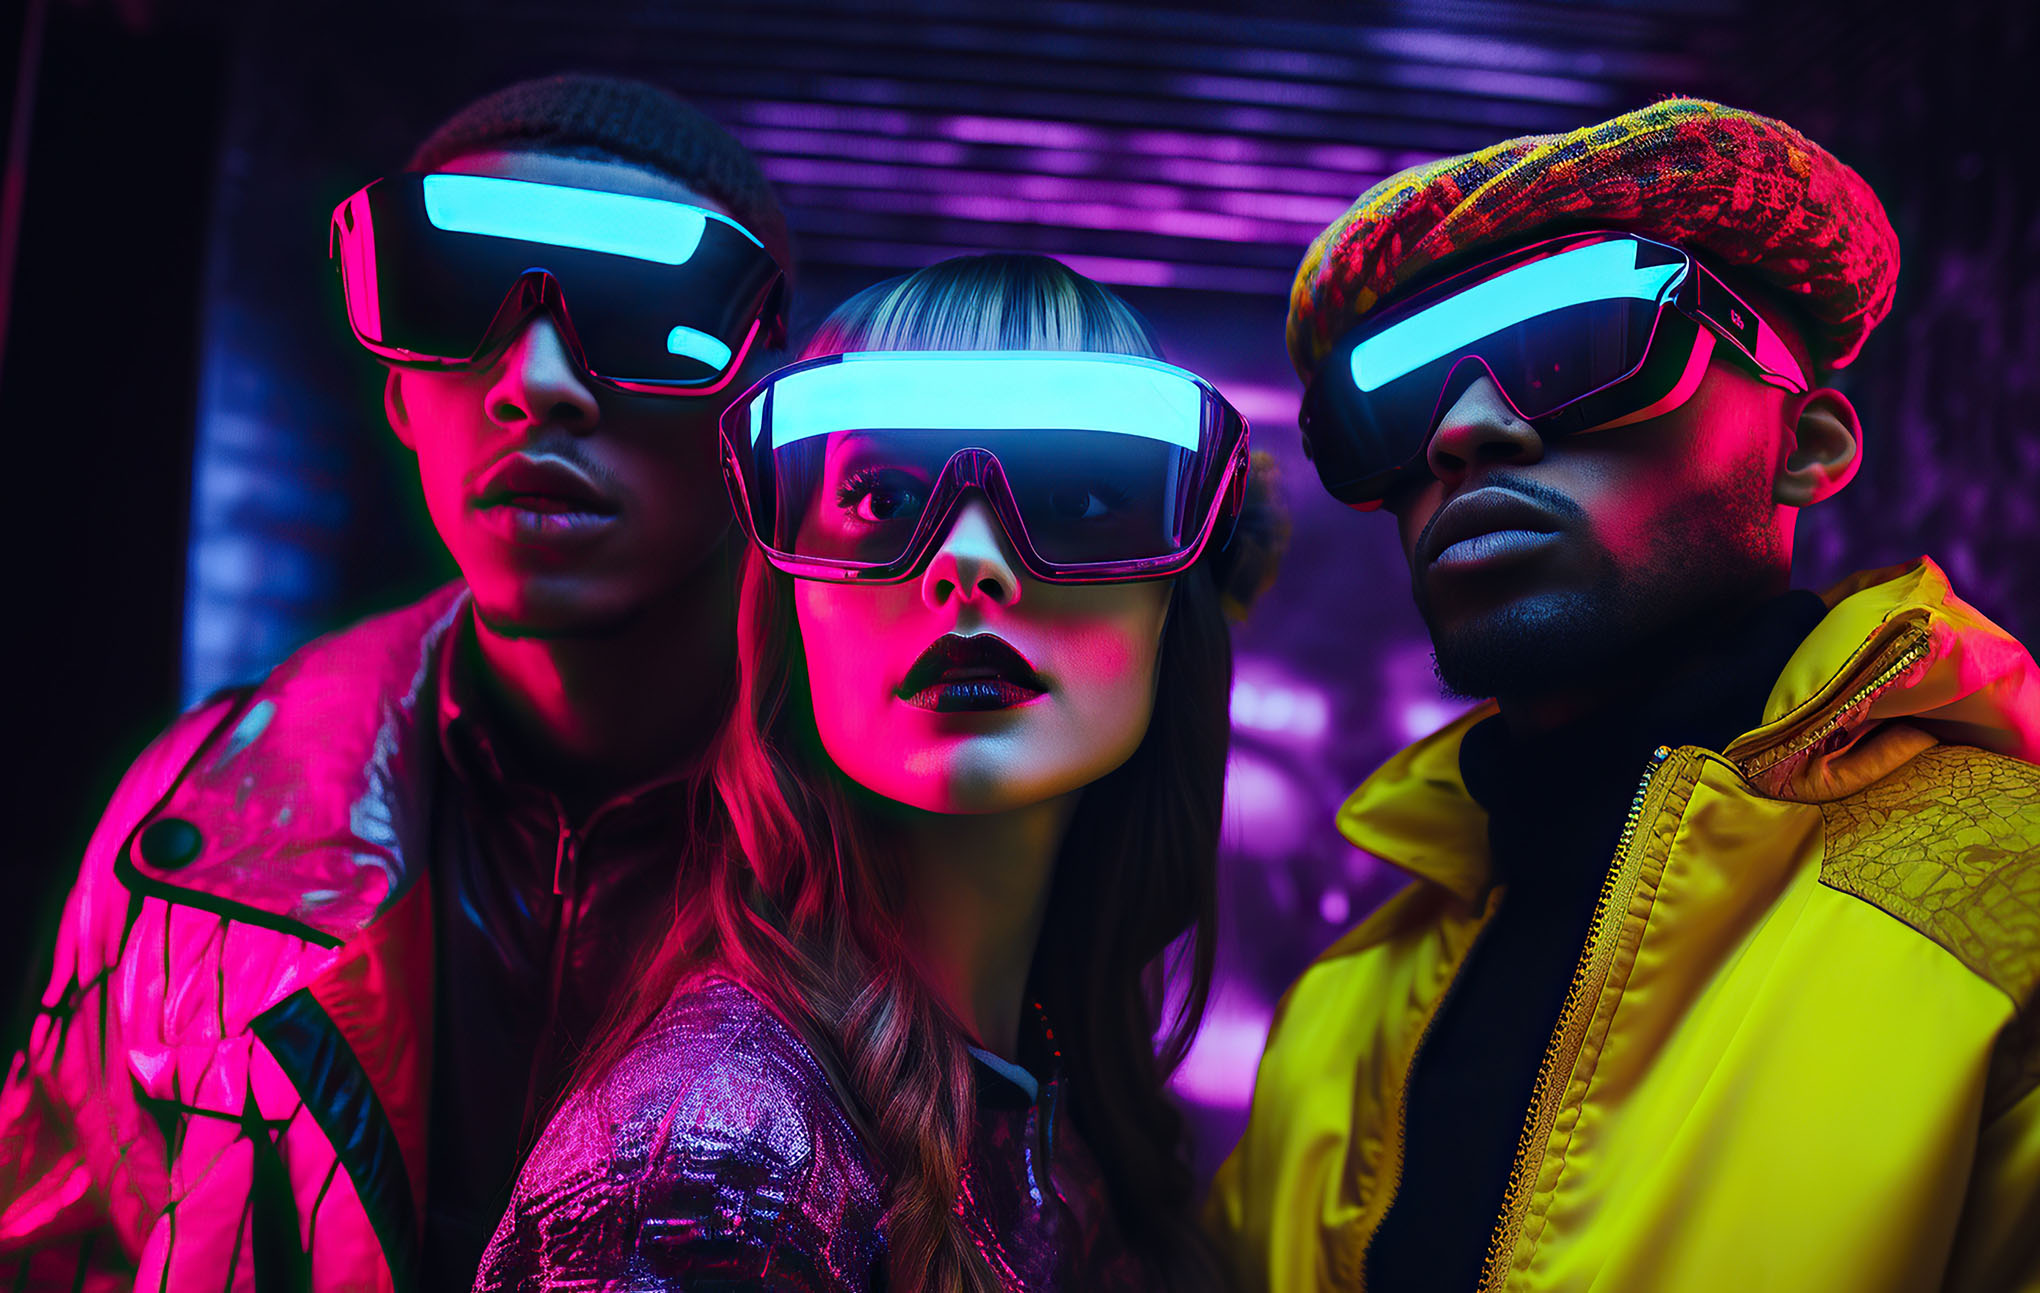 Three young adults in futuristic attire and oversized sunglasses stand together against a neon-lit backdrop. the vibrant lights cast a mix of blue and pink hues on their expressive, trendy outfits.